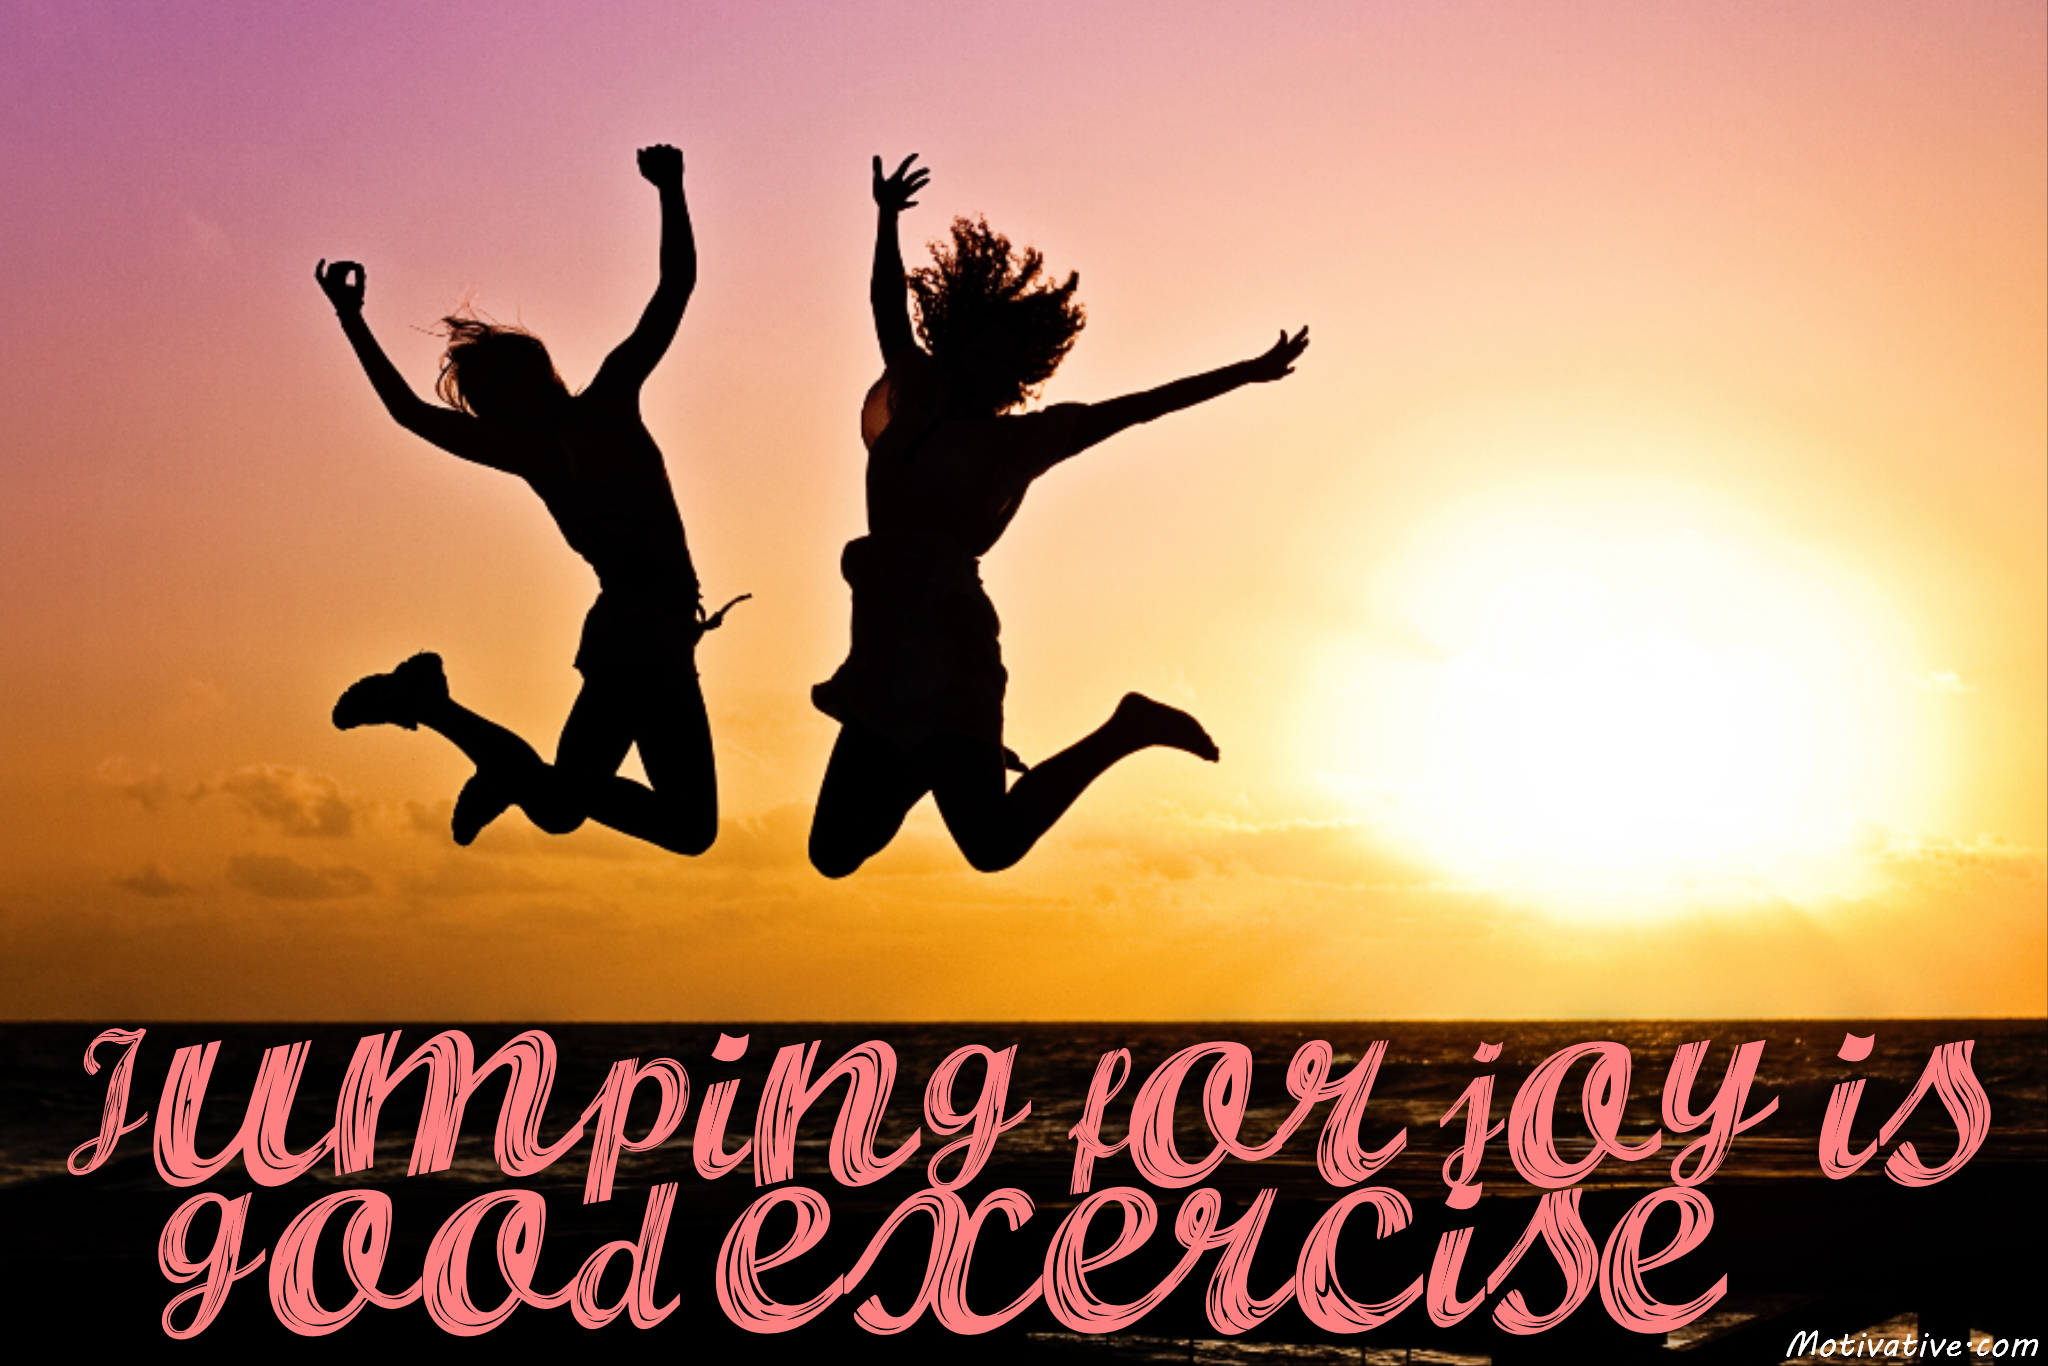 Jumping for joy is good exercise.